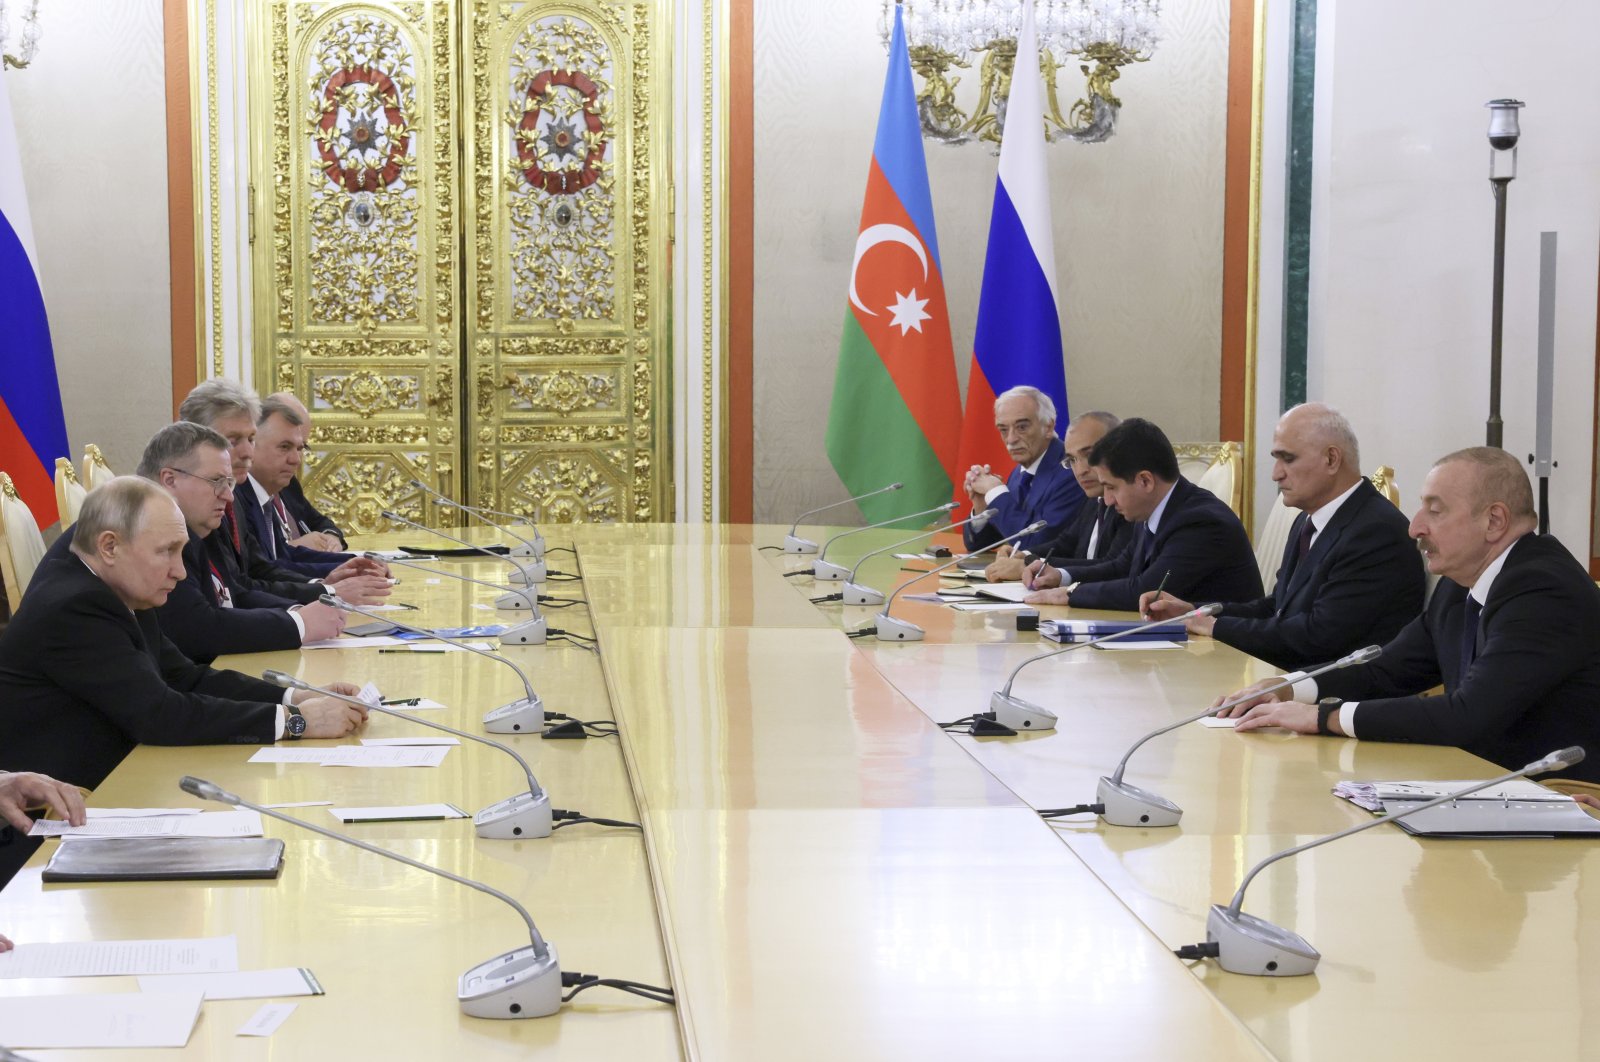 Russian President Vladimir Putin (L) meets with Azerbaijani President Ilham Aliyev on the sidelines of the Eurasian Economic Union summit at the Grand Kremlin Palace in Moscow, Russia, 25 May 2023. (EPA Photo)